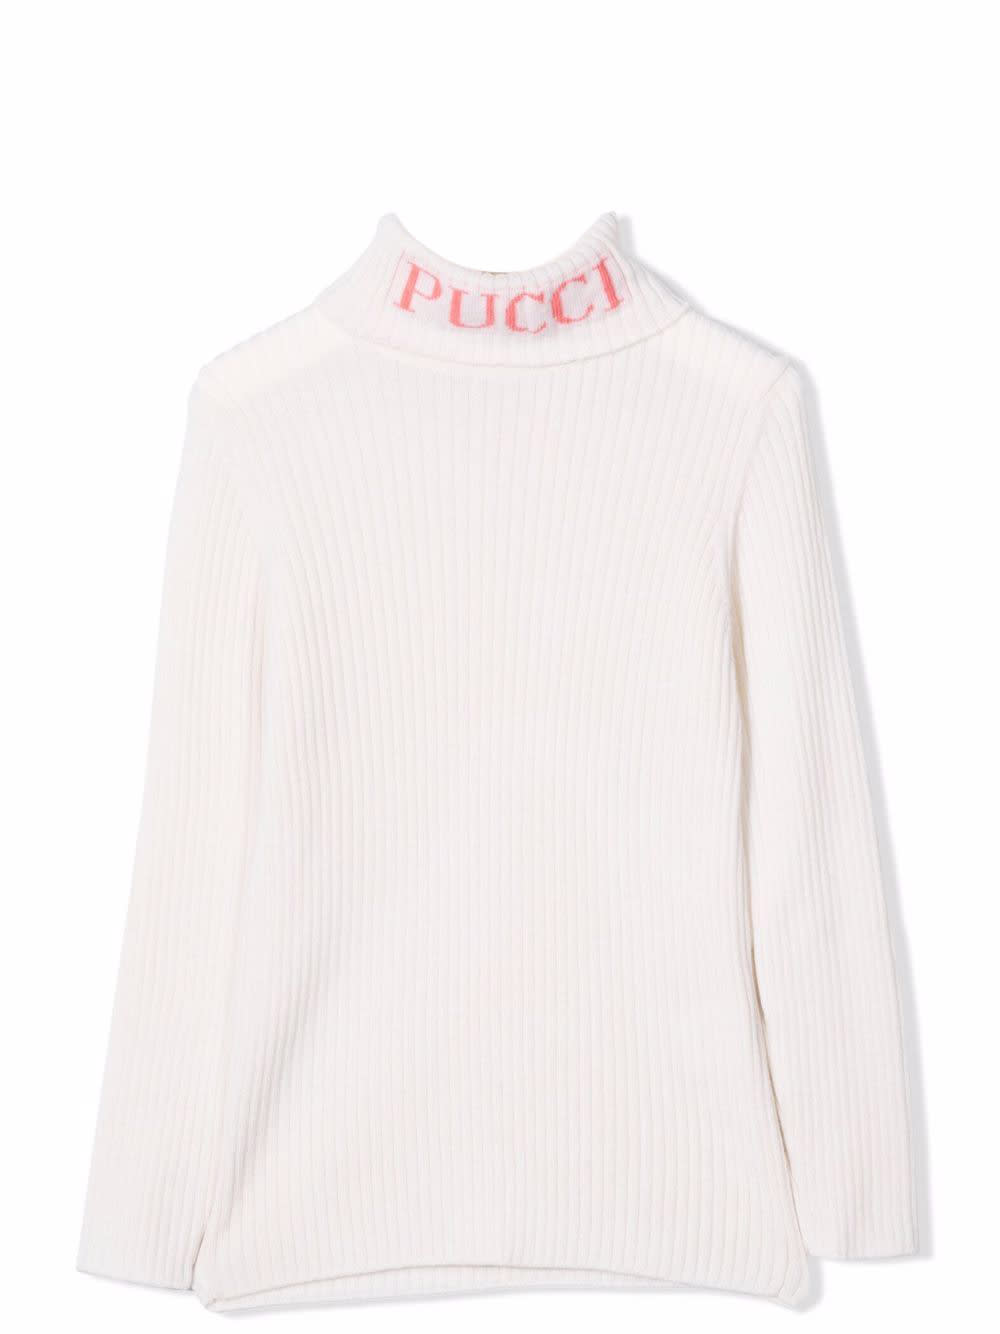 Emilio Pucci ribbed sweater with logo